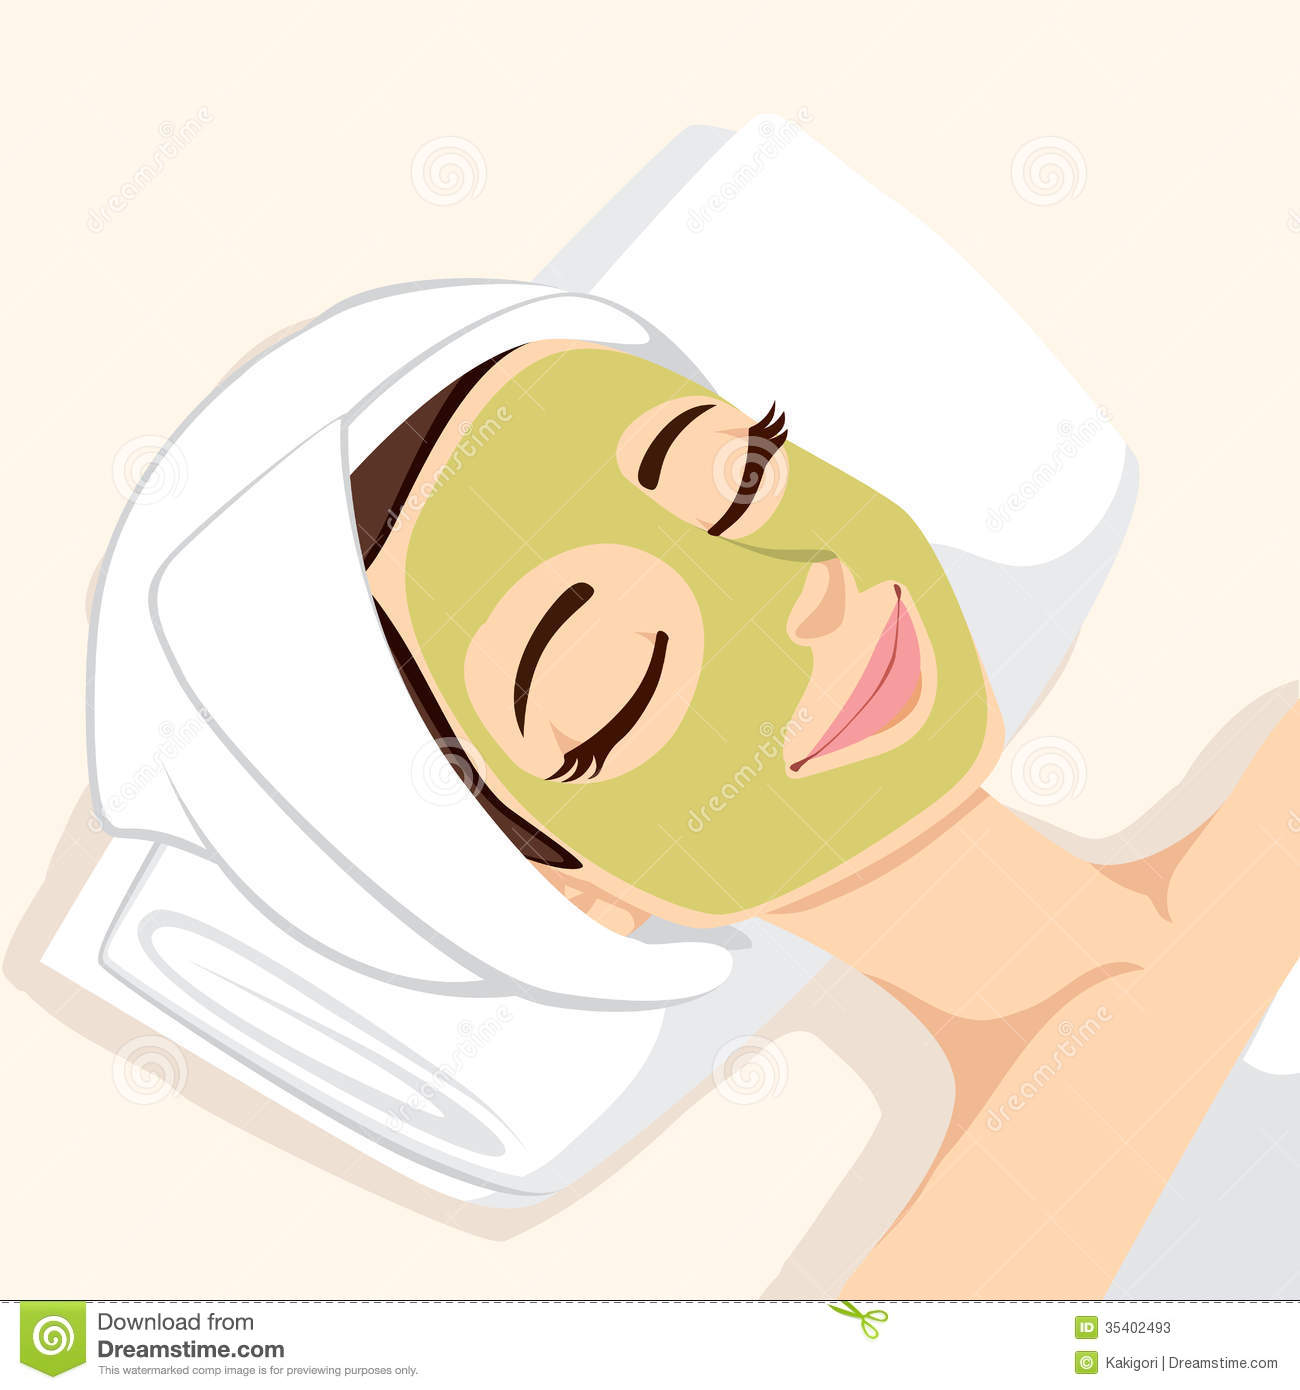 Acne Treatment With Natural Facial Green Mask To Clean Face Skin